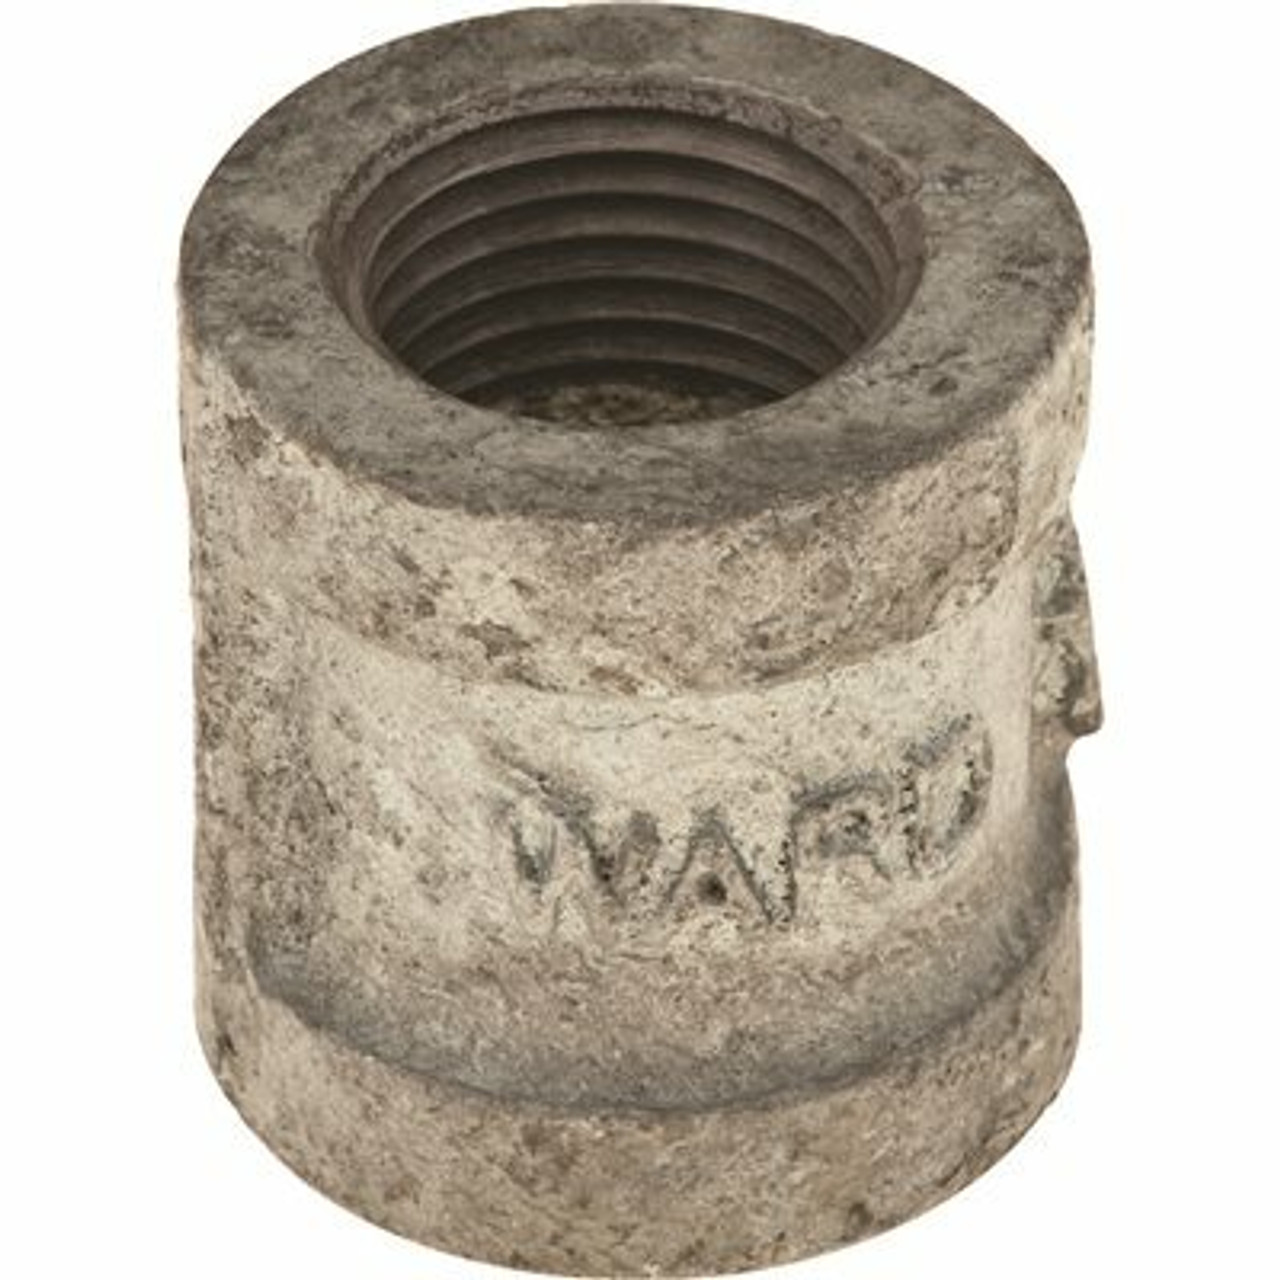 Ward Mfg. Galvanized Malleable Coupling 3/4 In.